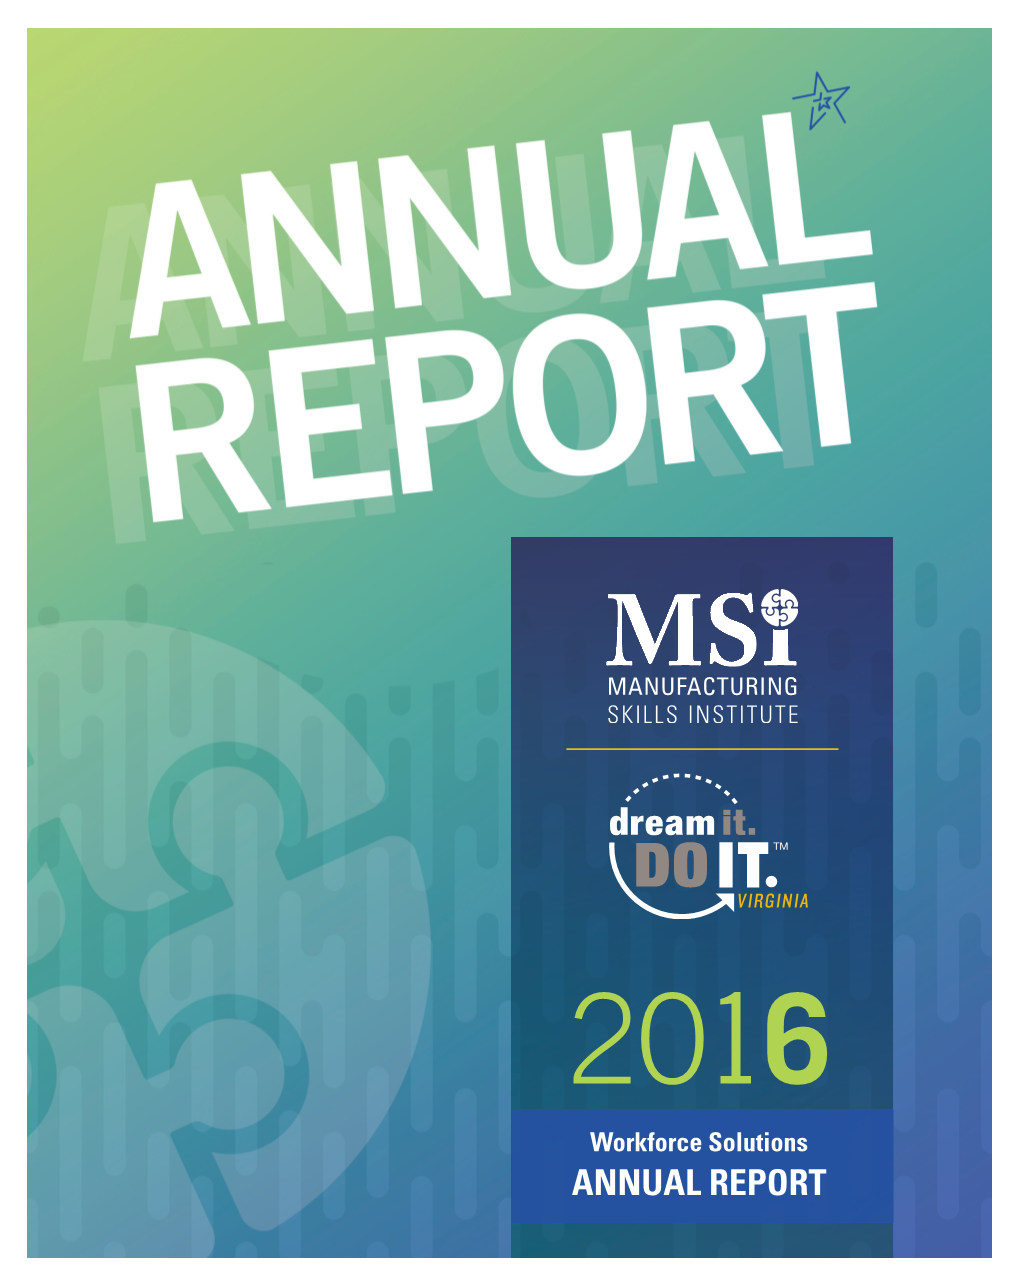 2016 Workforce Solutions ANNUAL REPORT